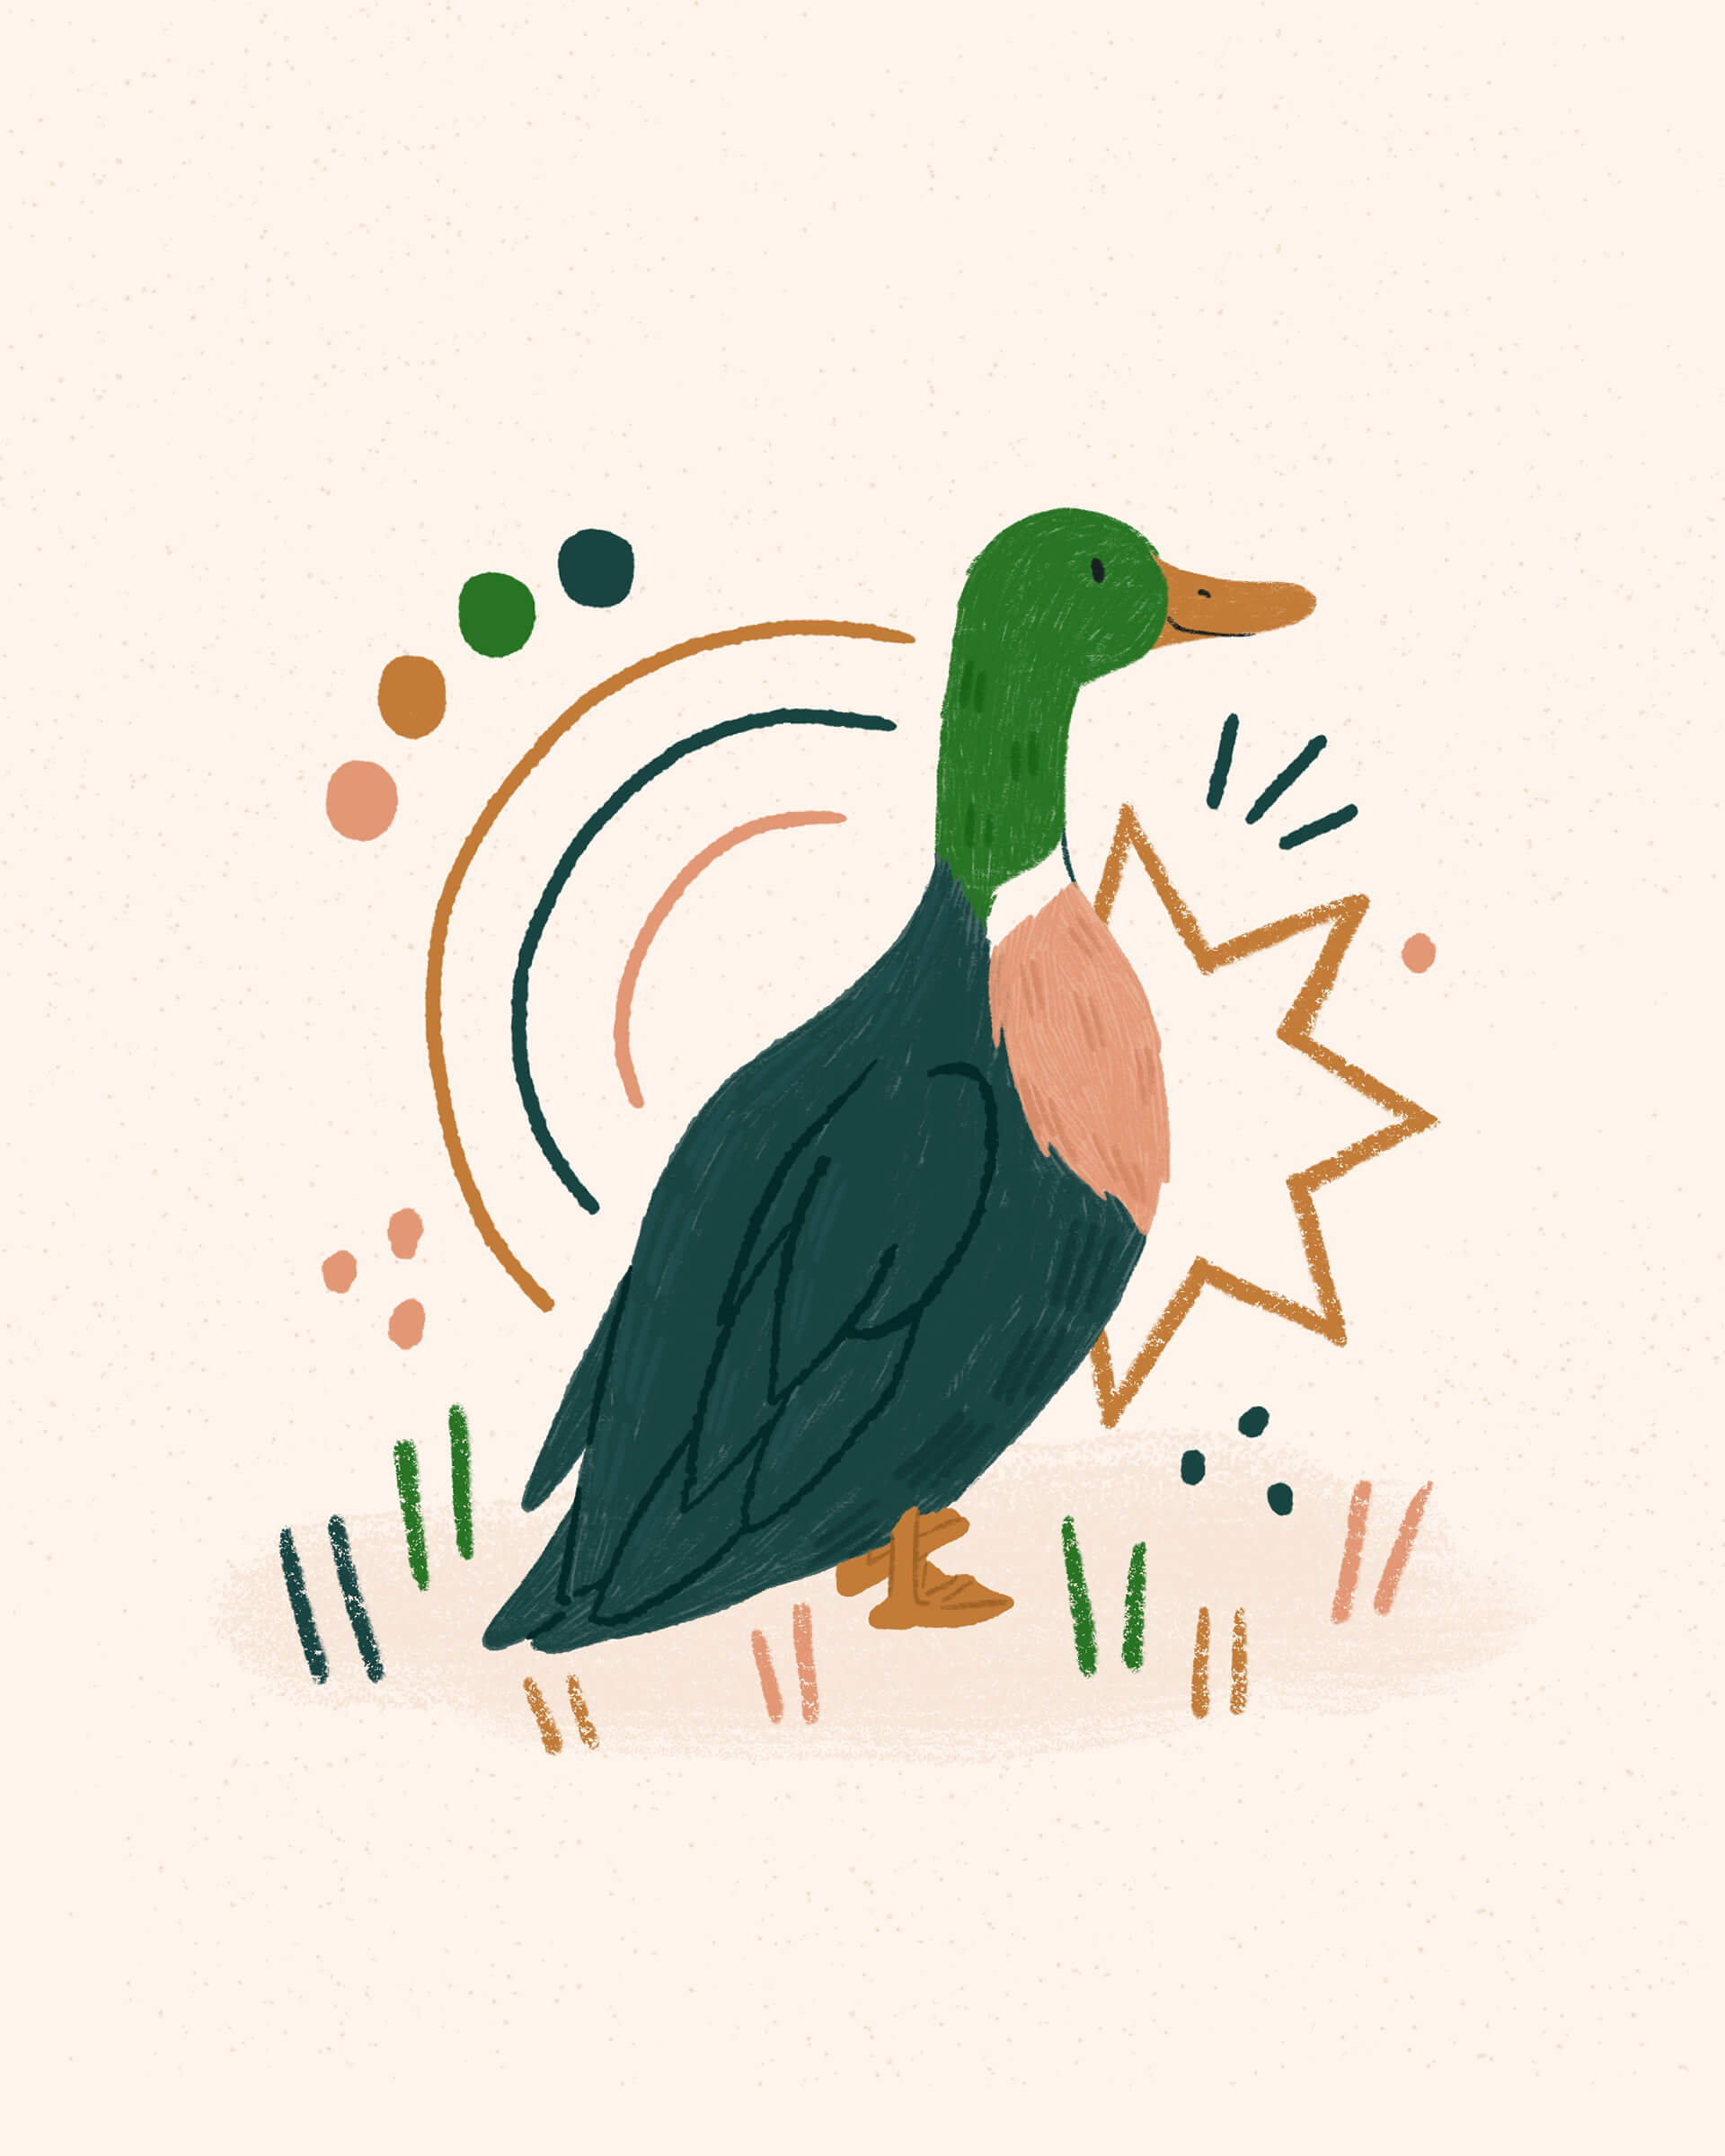 An illustration of a blue and green duck surrounded by colourful markings